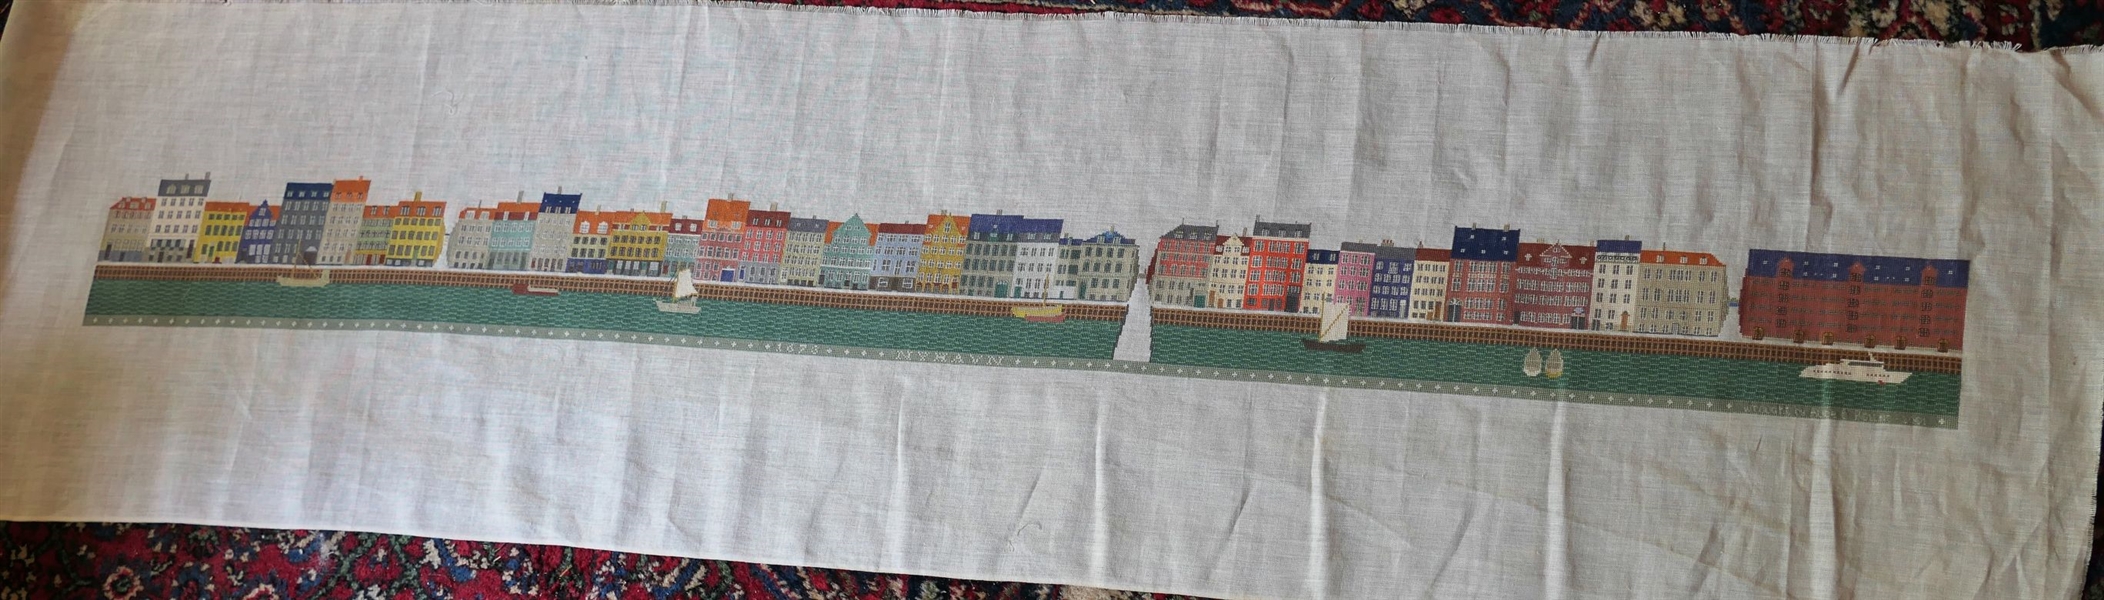 1673 NYHAVN  - Needlework By Rollins - Needle Point on Linen - Very Detailed - Measures 67" by 6 1/2" 